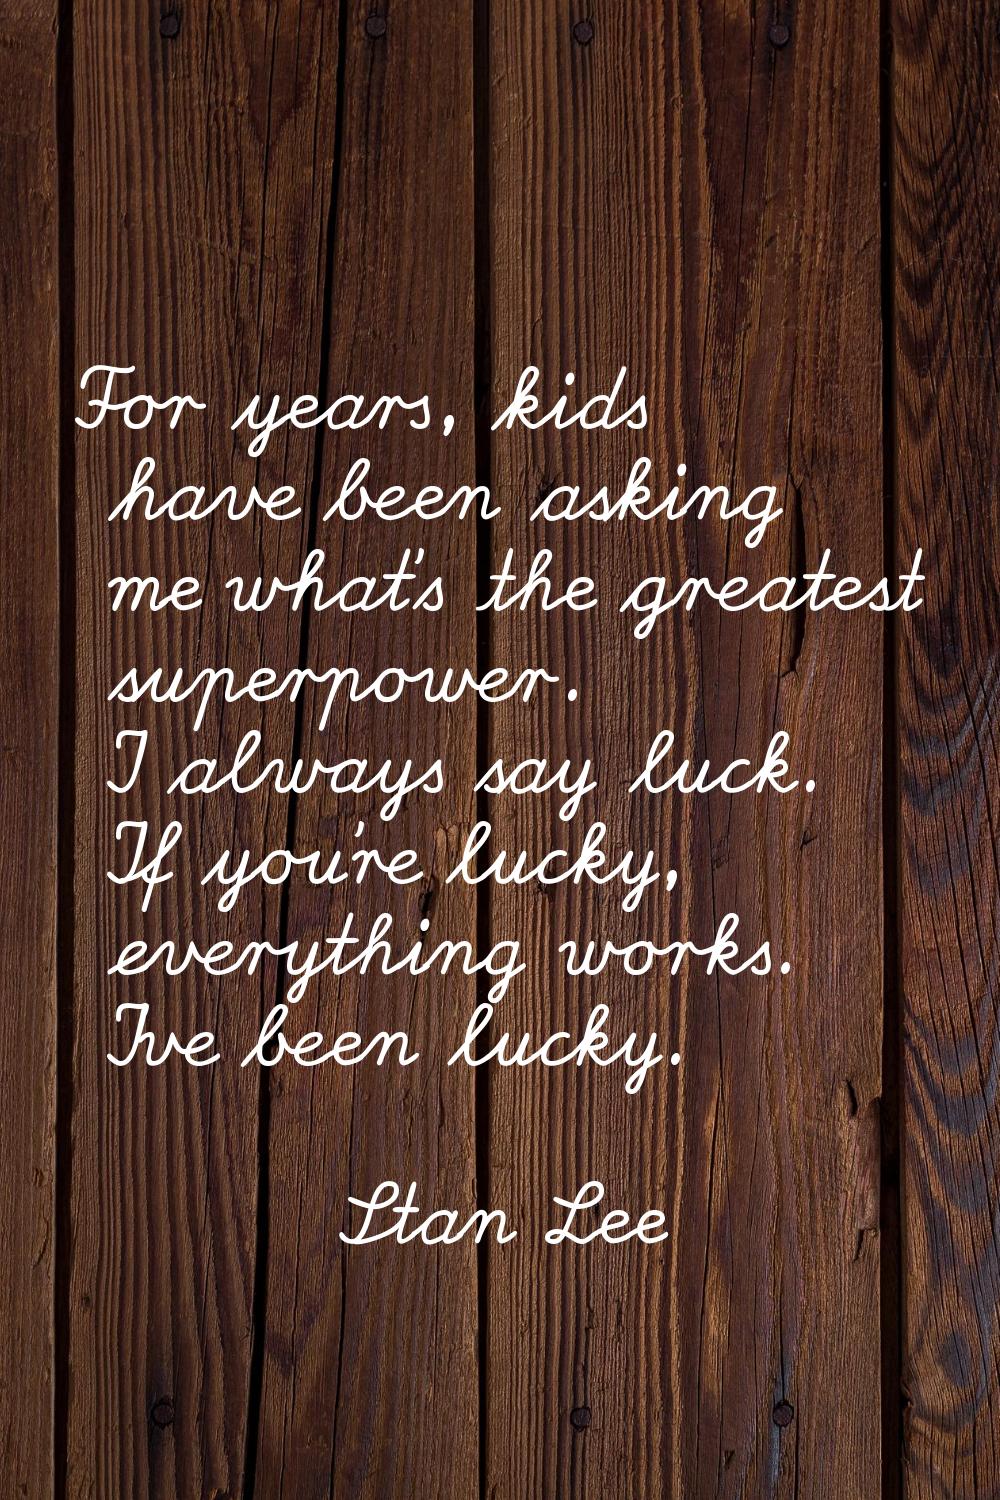 For years, kids have been asking me what's the greatest superpower. I always say luck. If you're lu